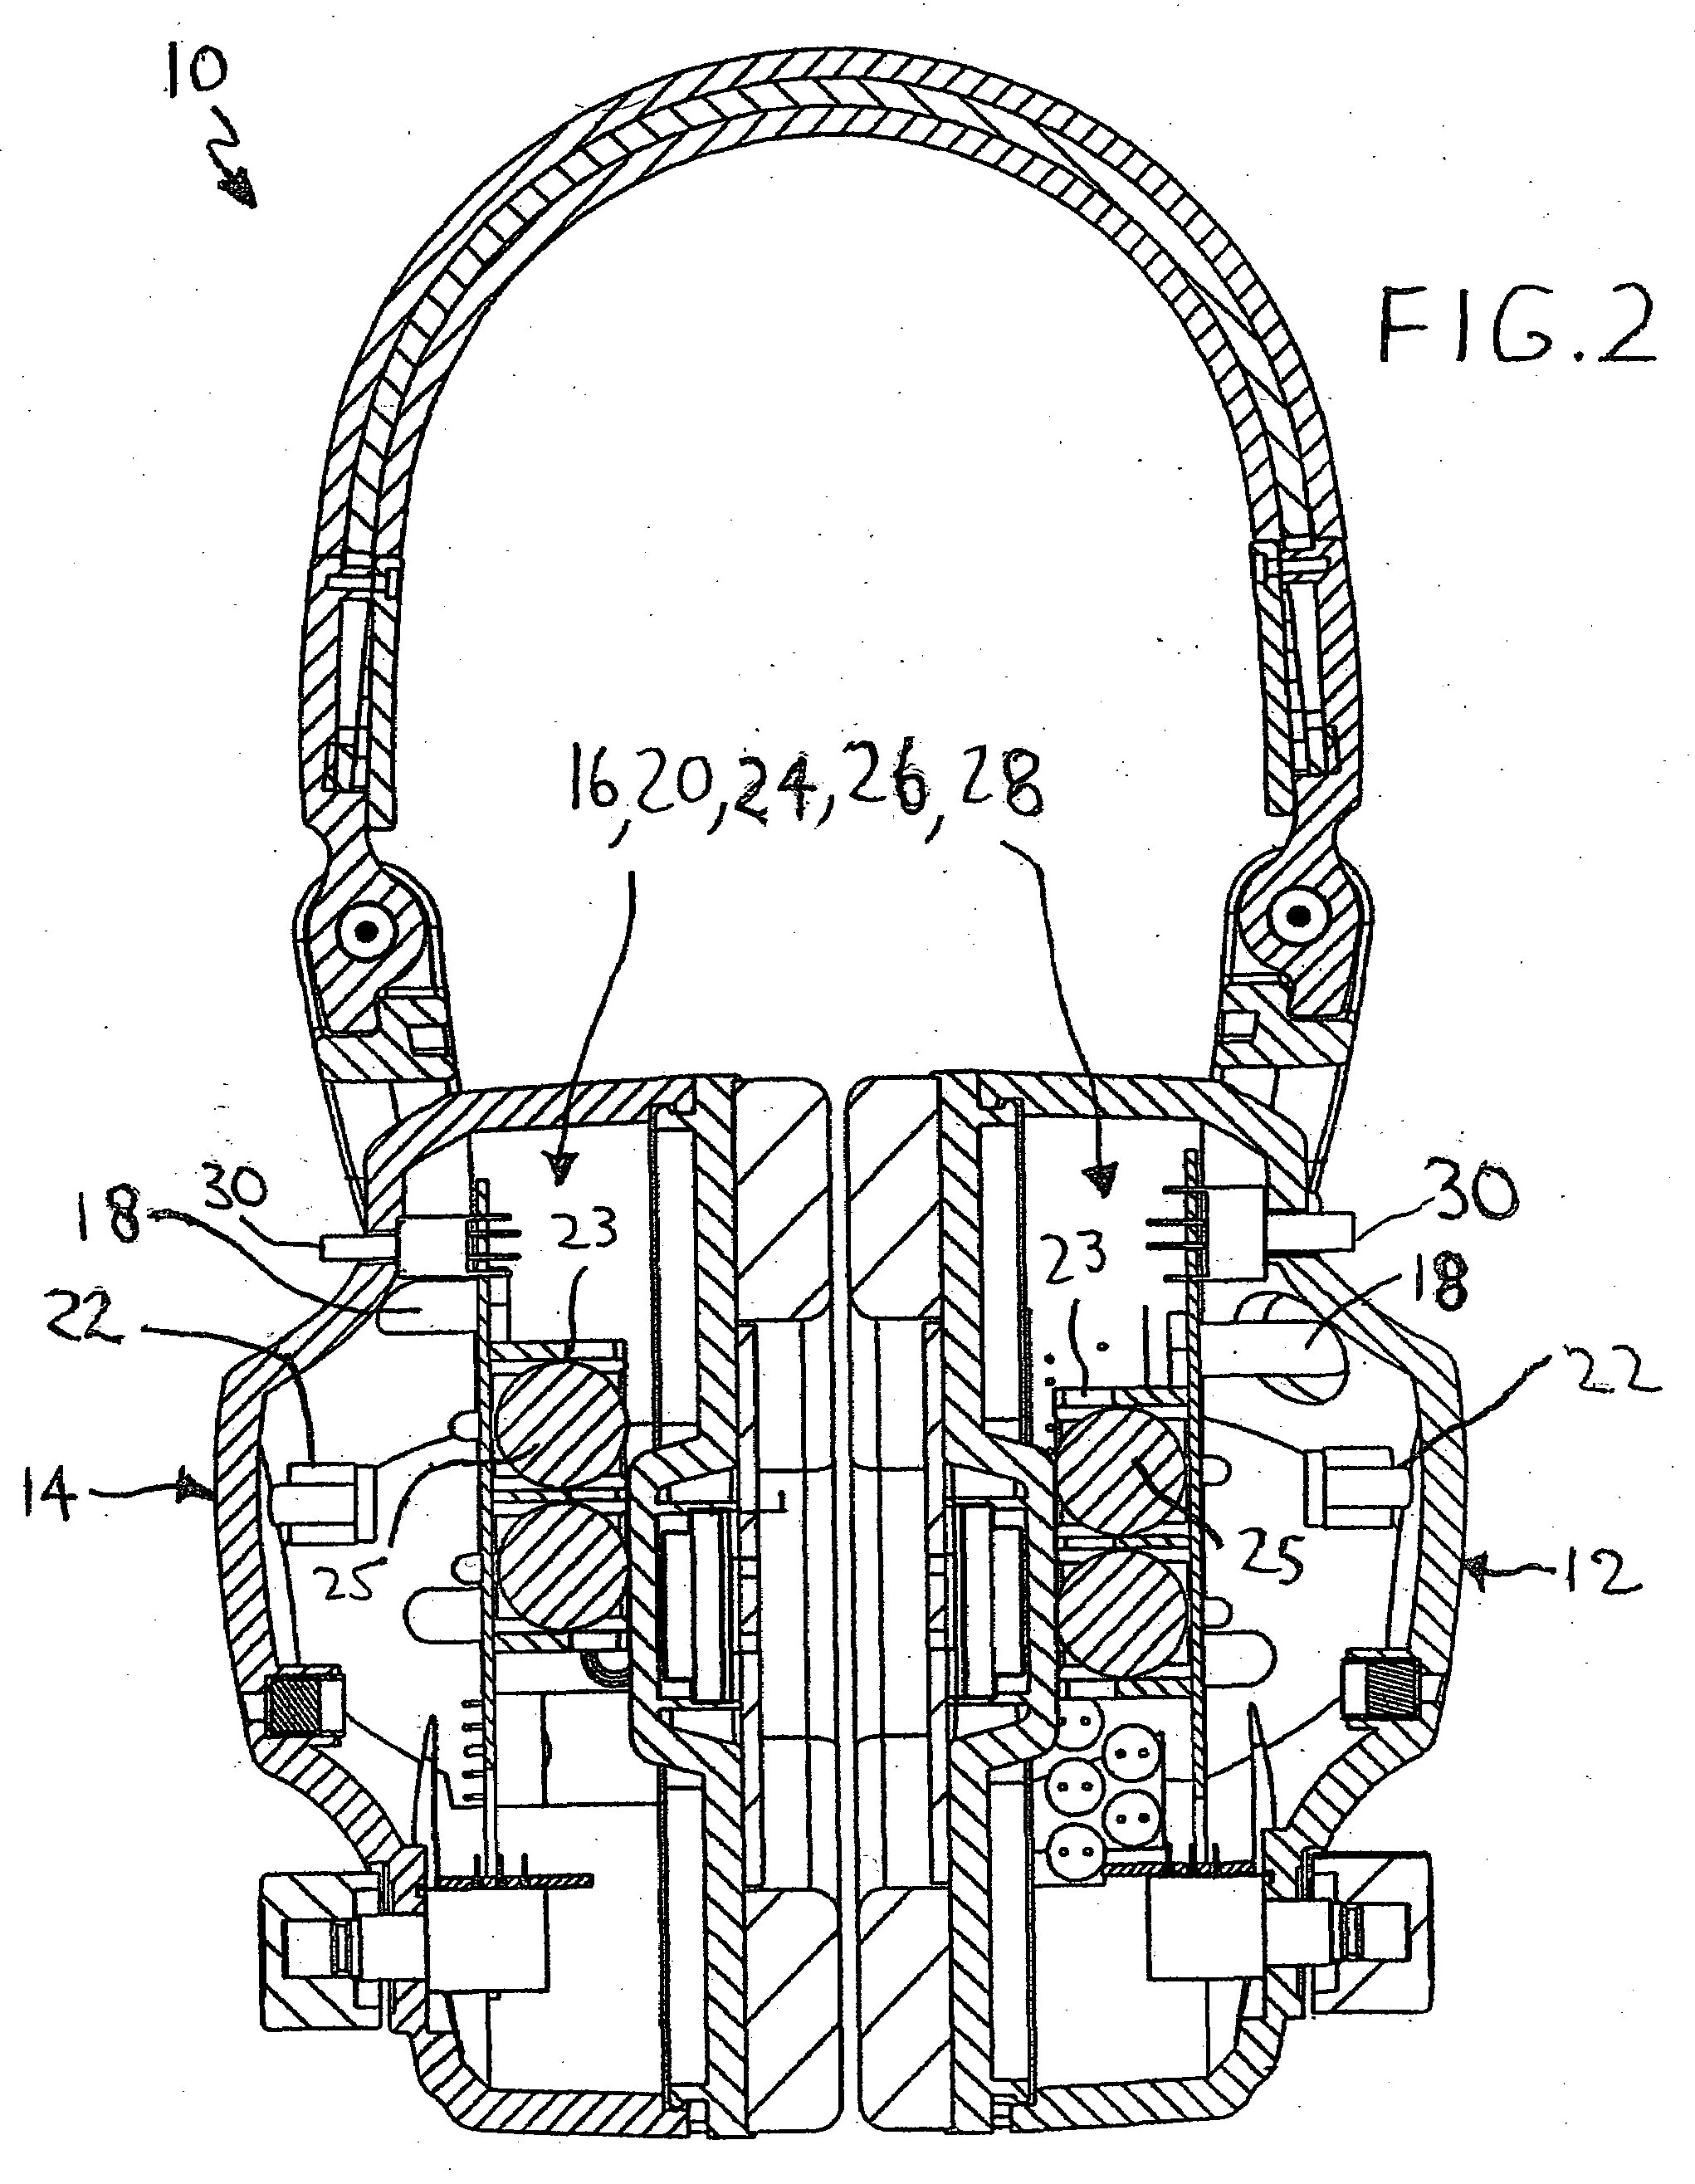 Manually switching dual-mode hearing protector